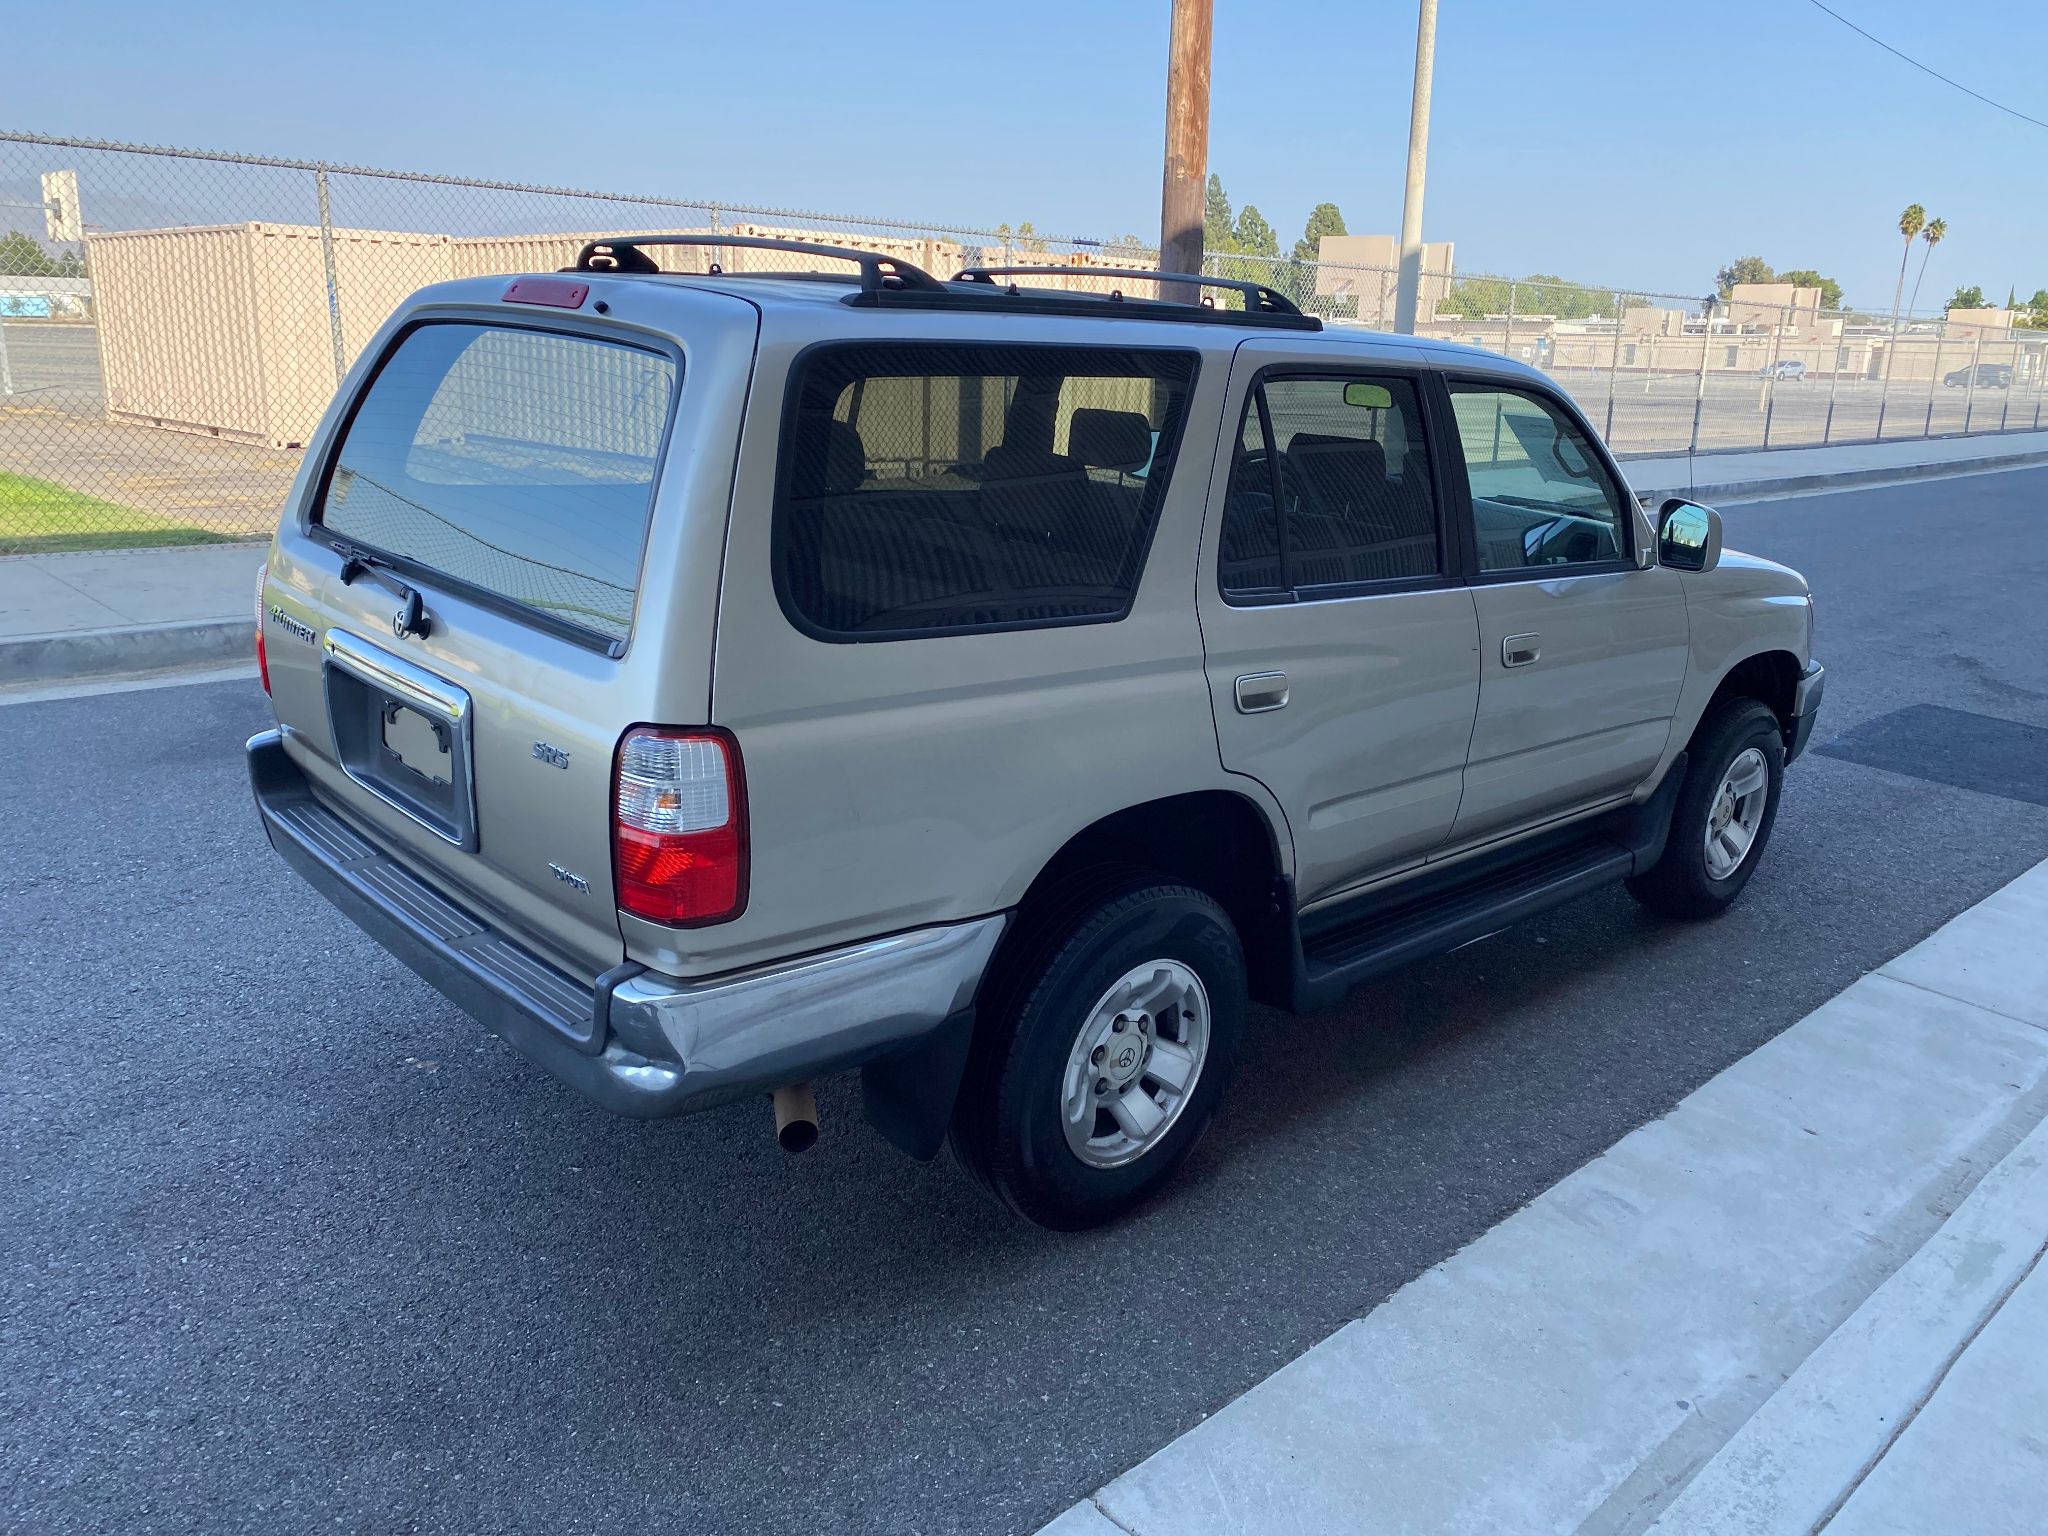 Used 2002 Toyota 4runner Sr5 At City Cars Warehouse Inc